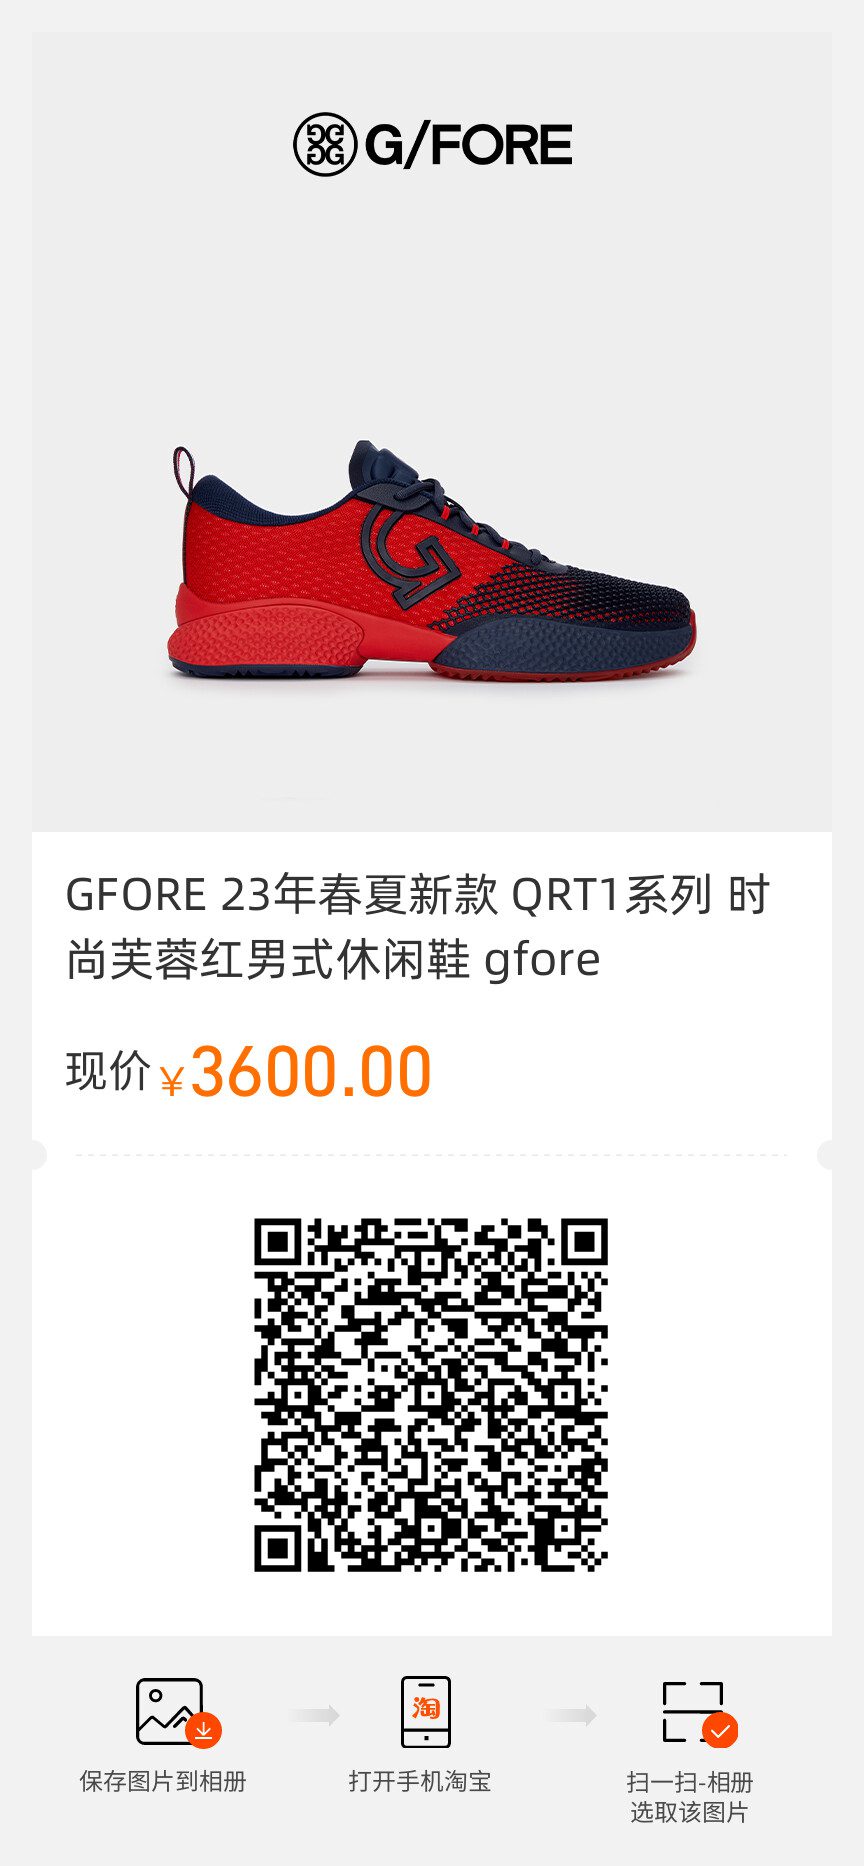 G/FORE上海One ITC店开业，新款球鞋QRT1首发，定价3600元 - G/FORE, 奢饰品